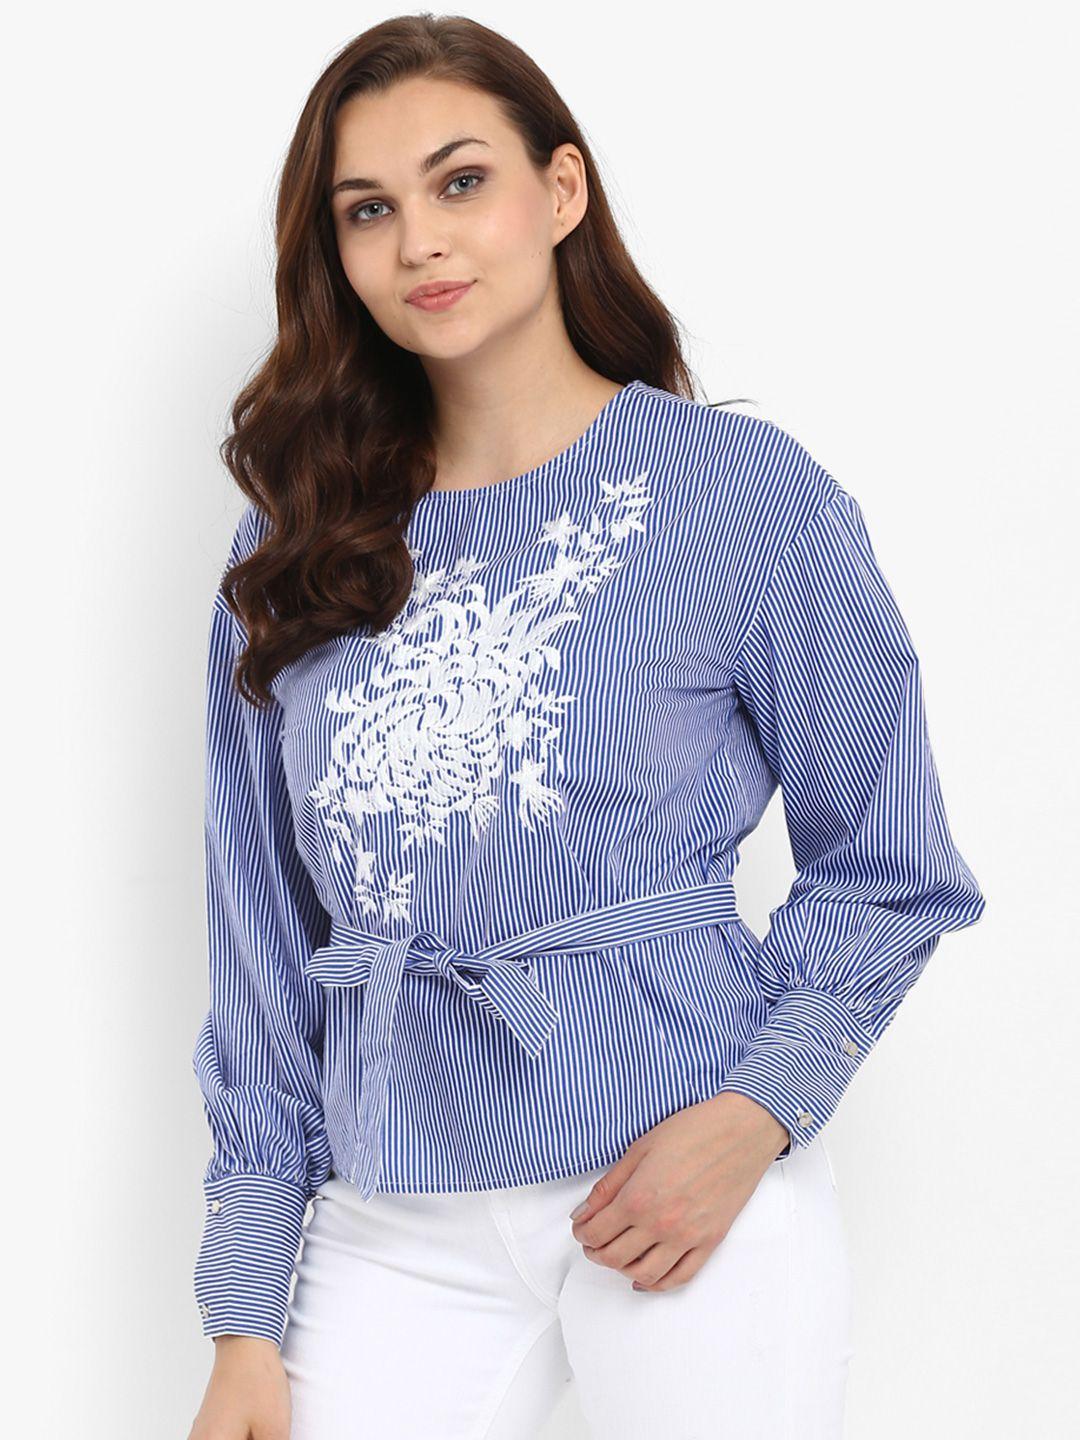 athah blue & white floral embellished top